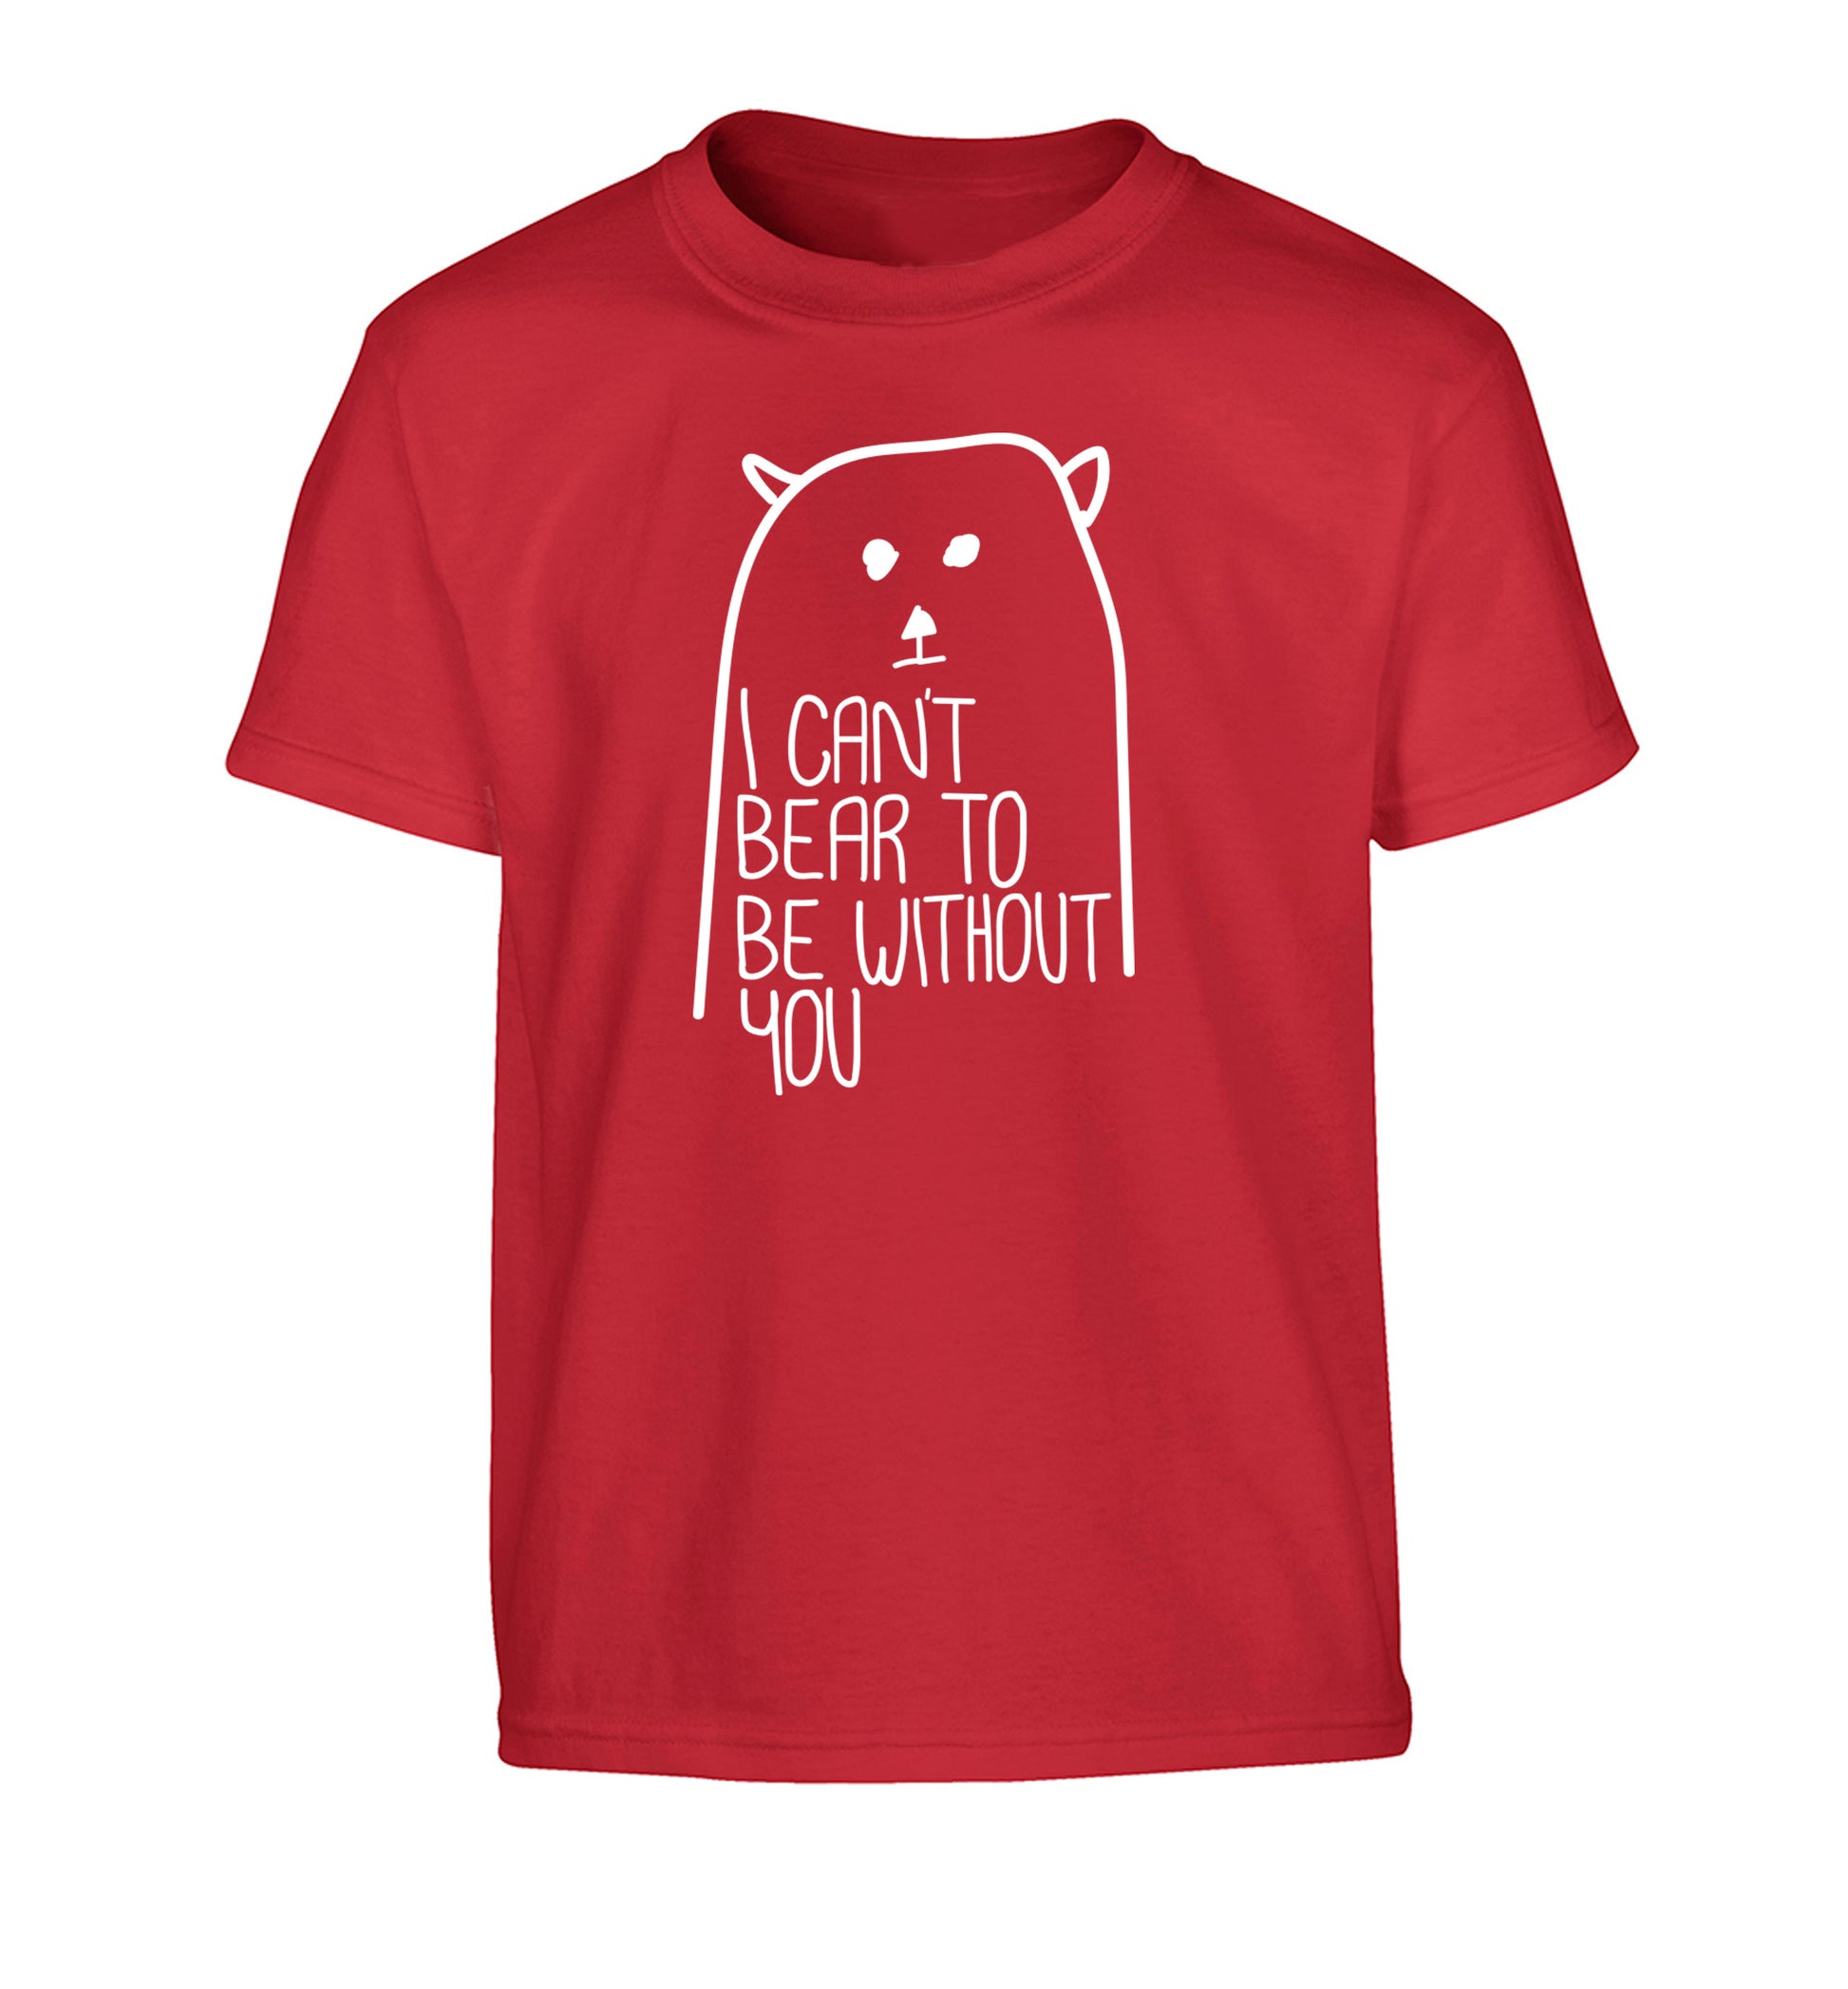 I can't bear to be without you Children's red Tshirt 12-13 Years